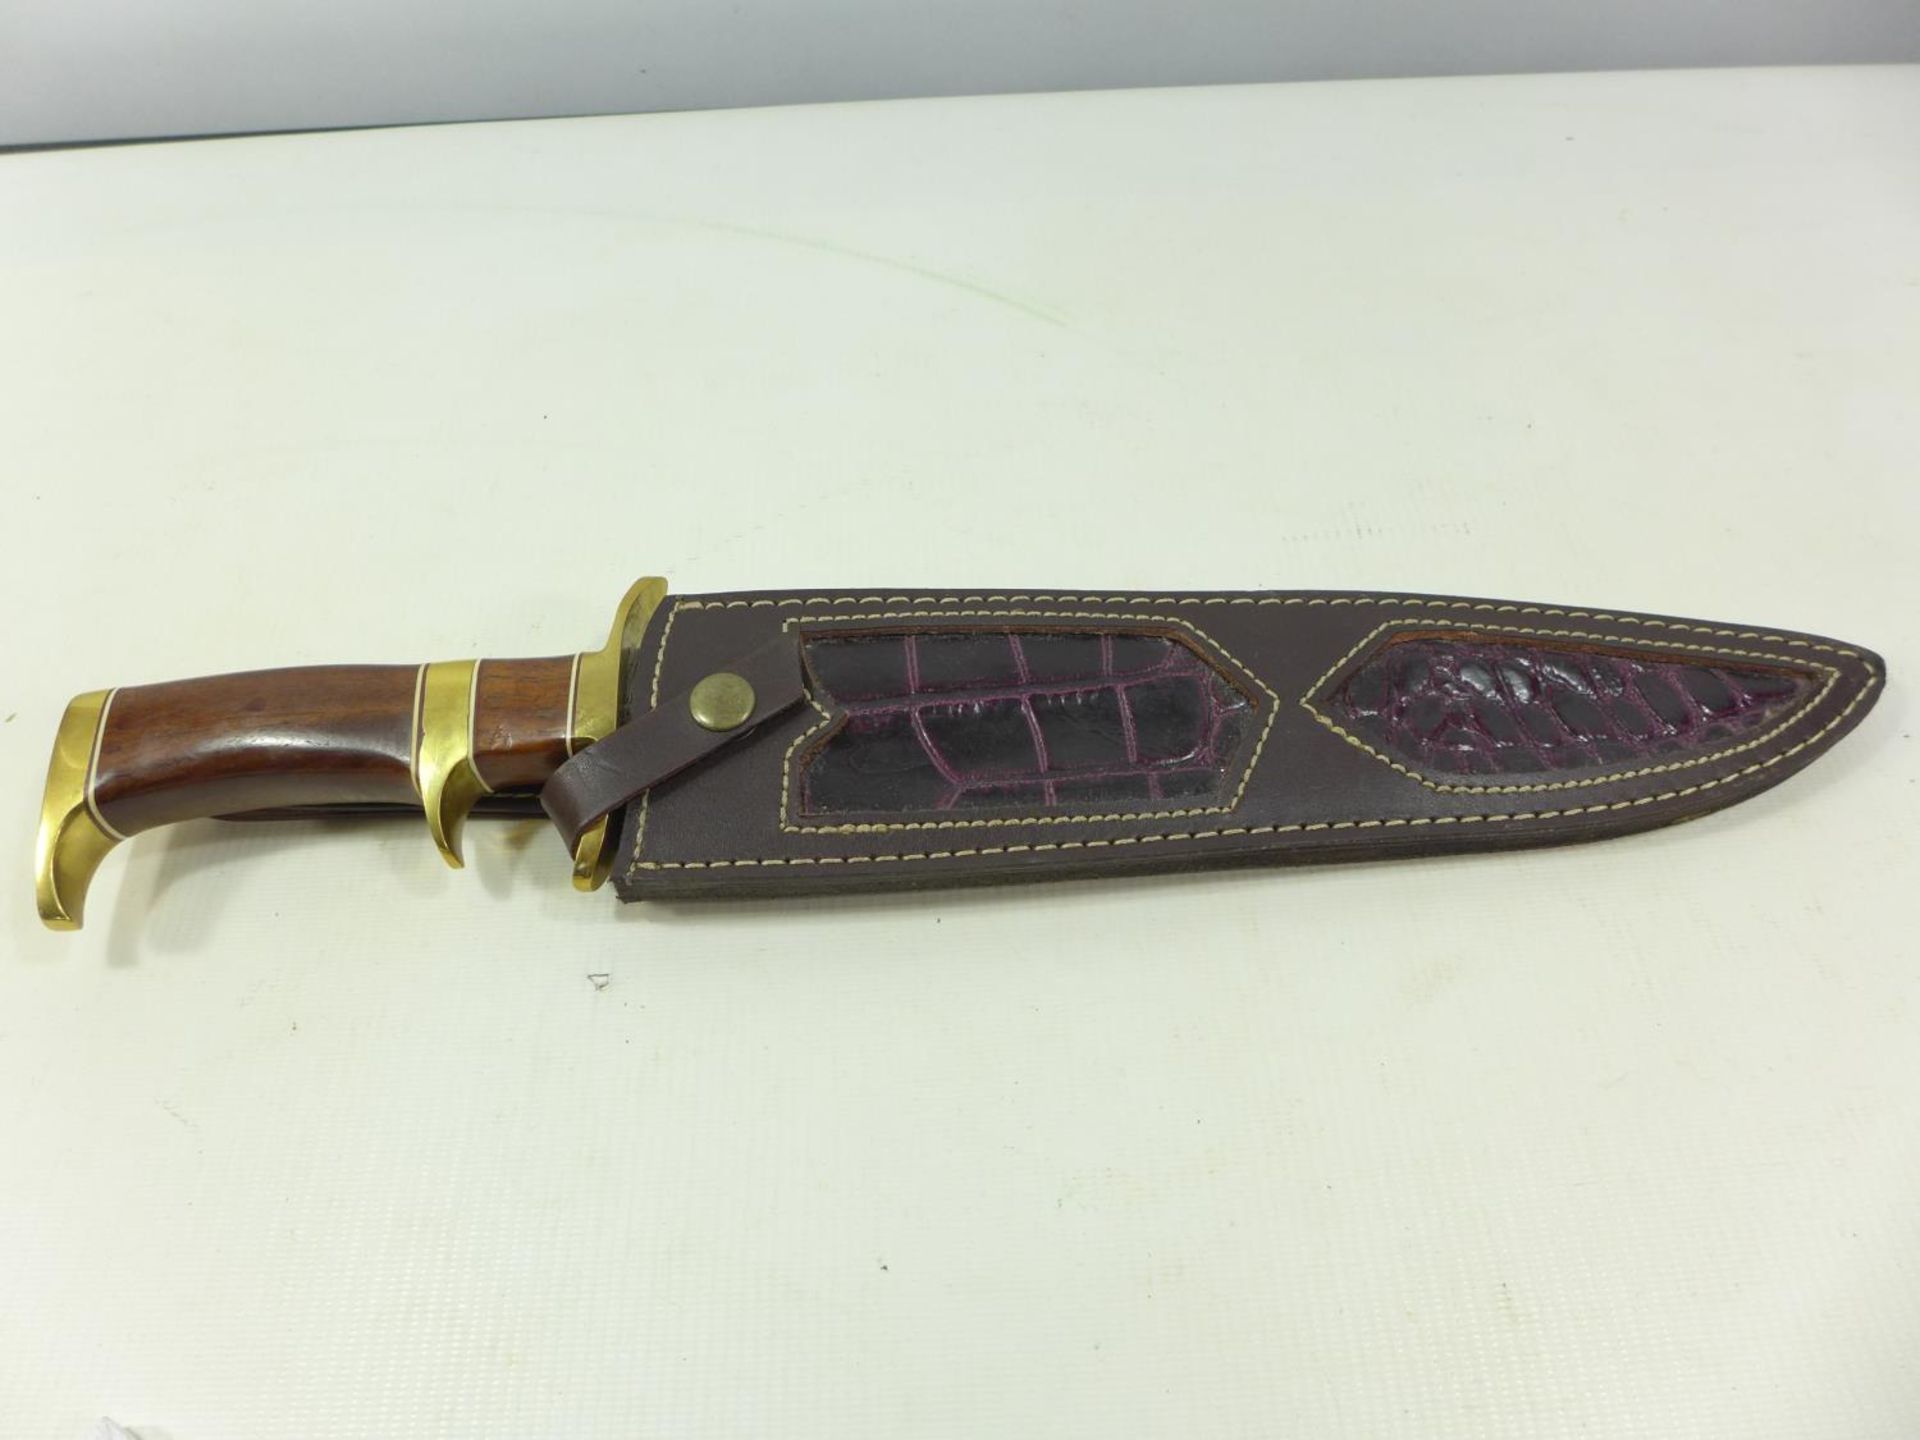 A LARGE WELL MADE HUNTING KNIFE AND SCABBARD 28 CM DAMASCUS BLADE - Image 5 of 5